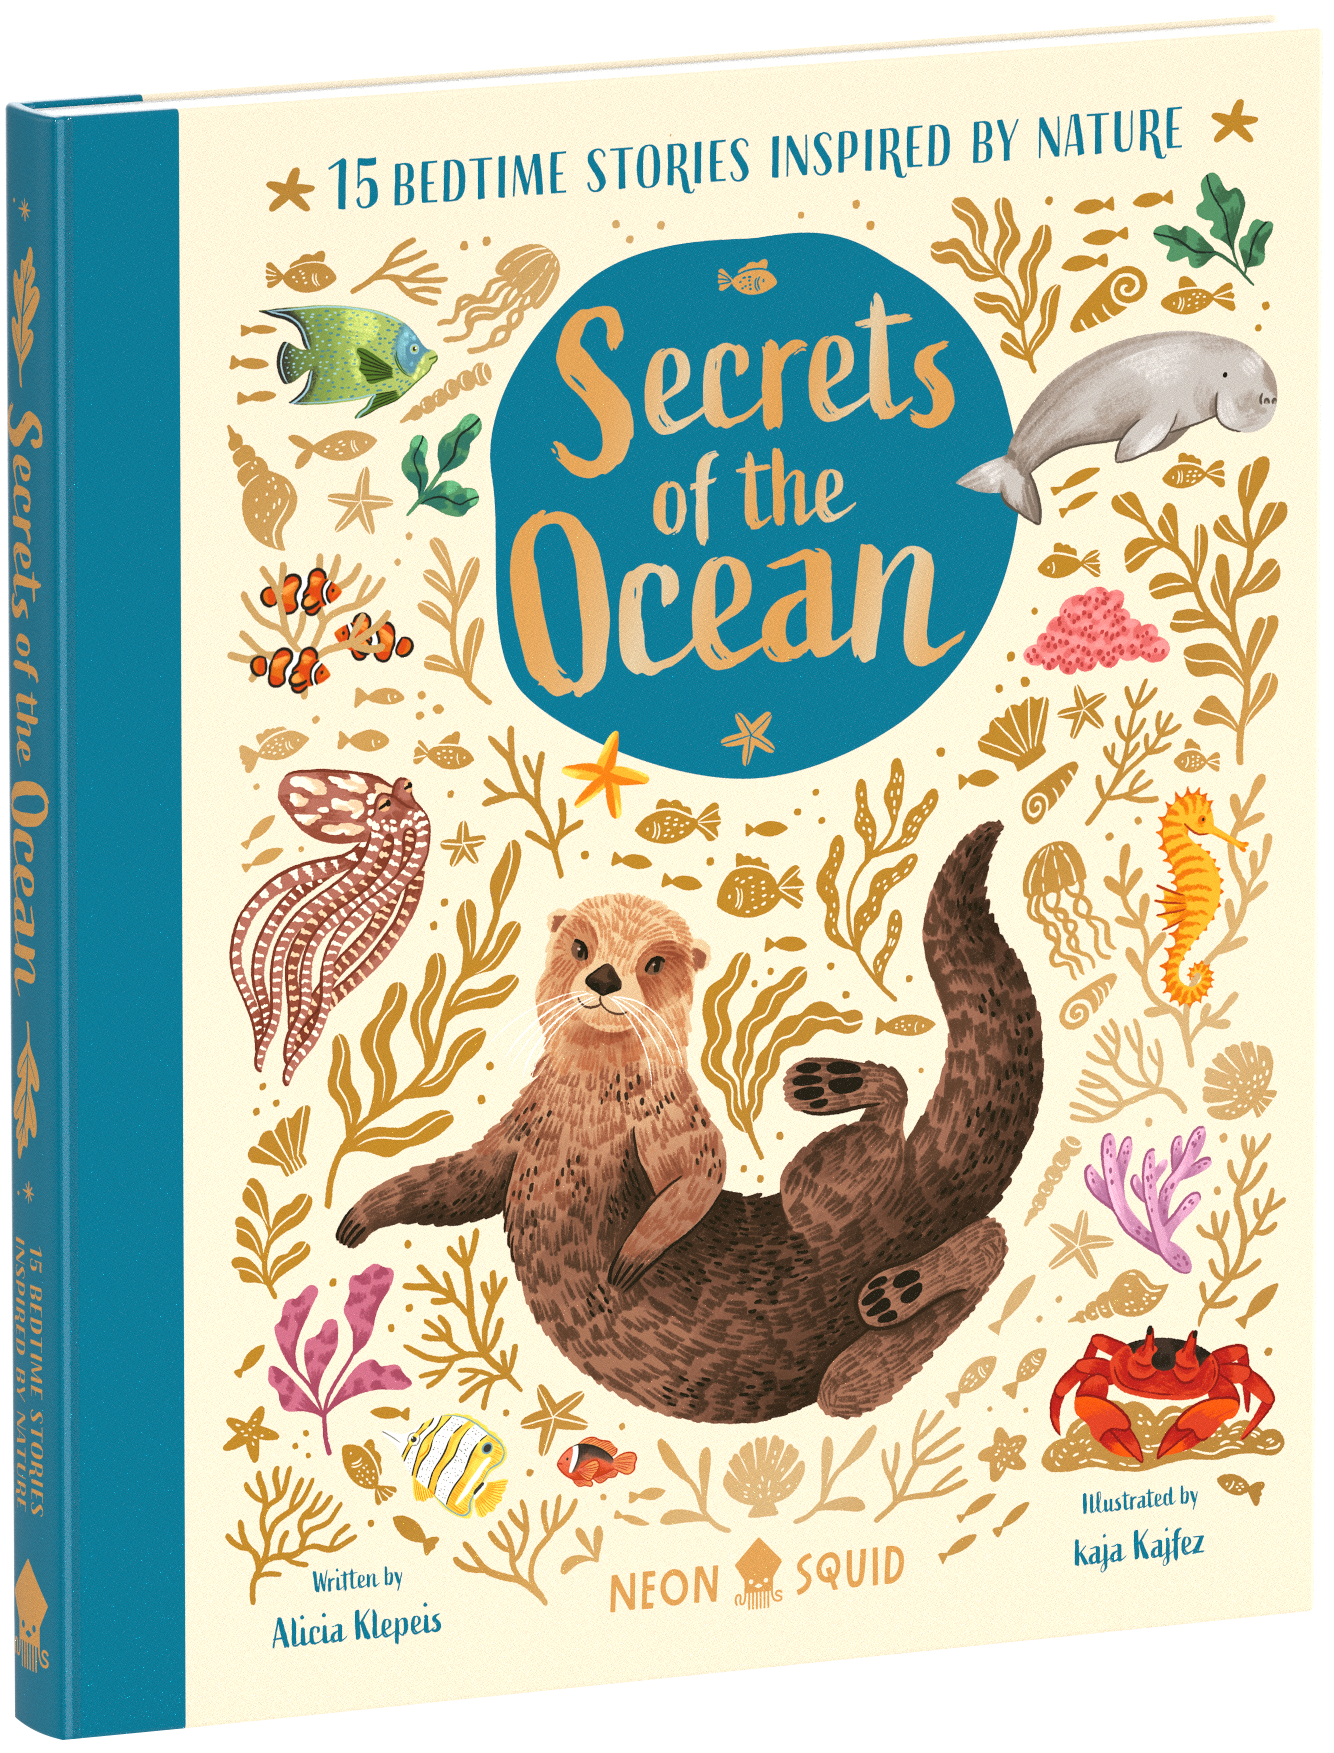 Cover of the book "secrets of the ocean," featuring a playful otter, a dolphin, and various marine life with colorful illustrations. text indicates it contains 15 bedtime stories inspired by nature.